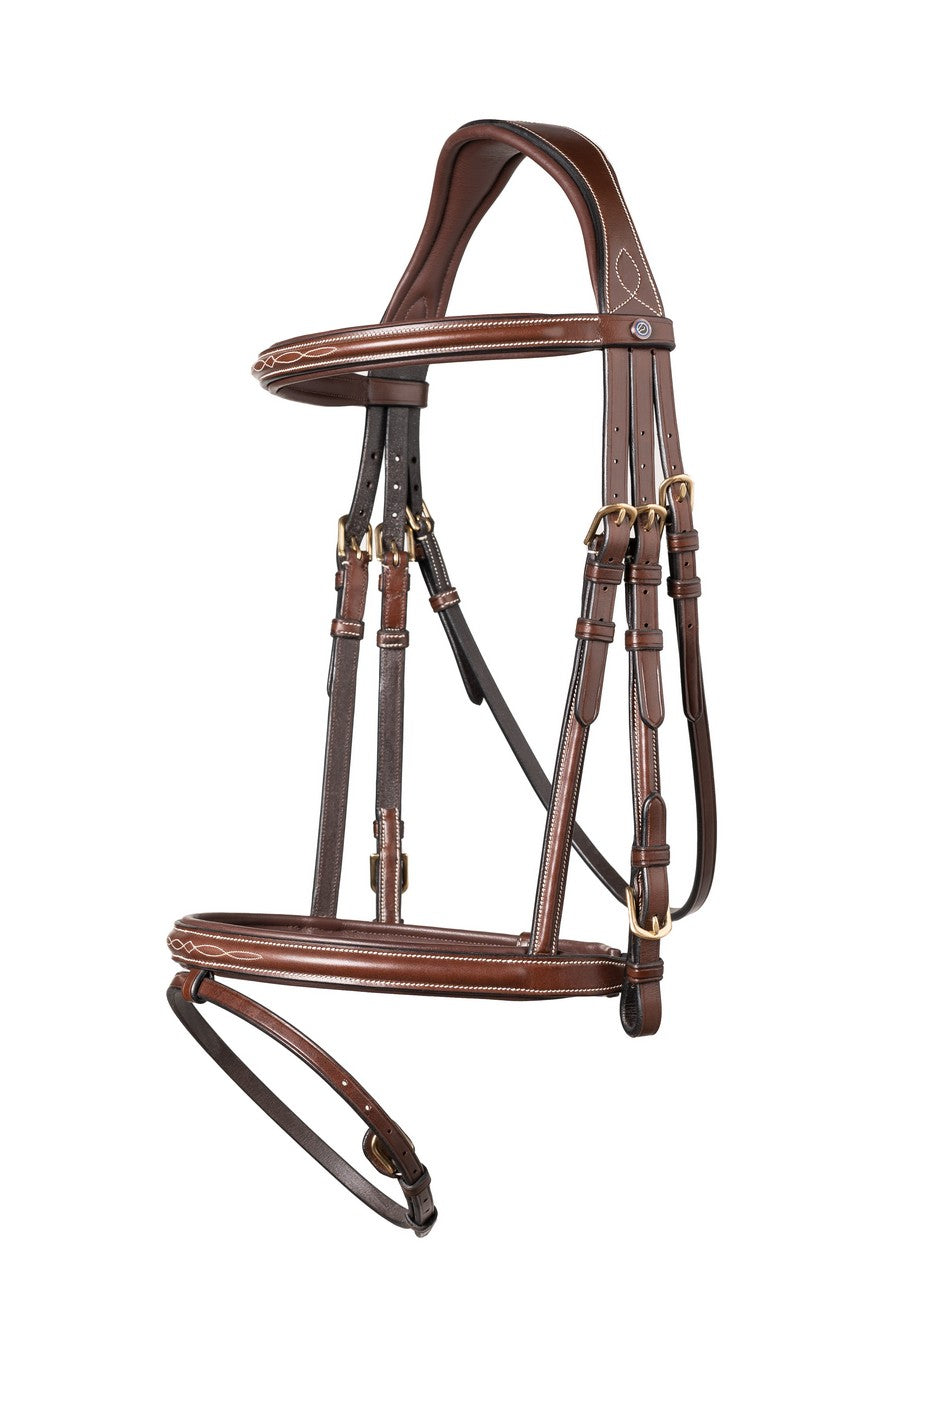 Trust Knokke Combined Noseband Classic Bridle Brown/Silver